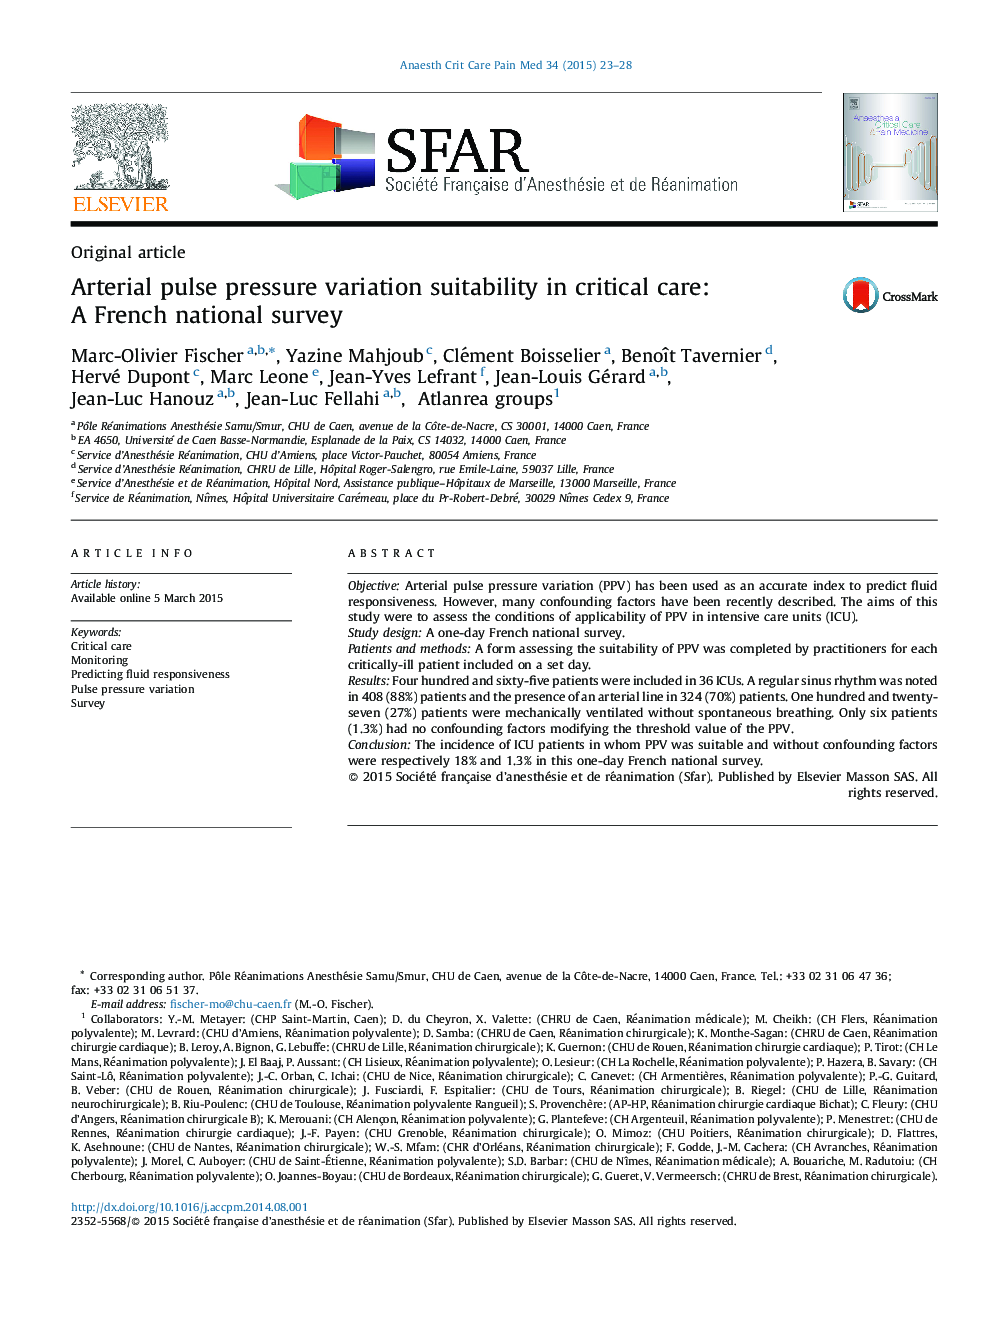 Arterial pulse pressure variation suitability in critical care: A French national survey